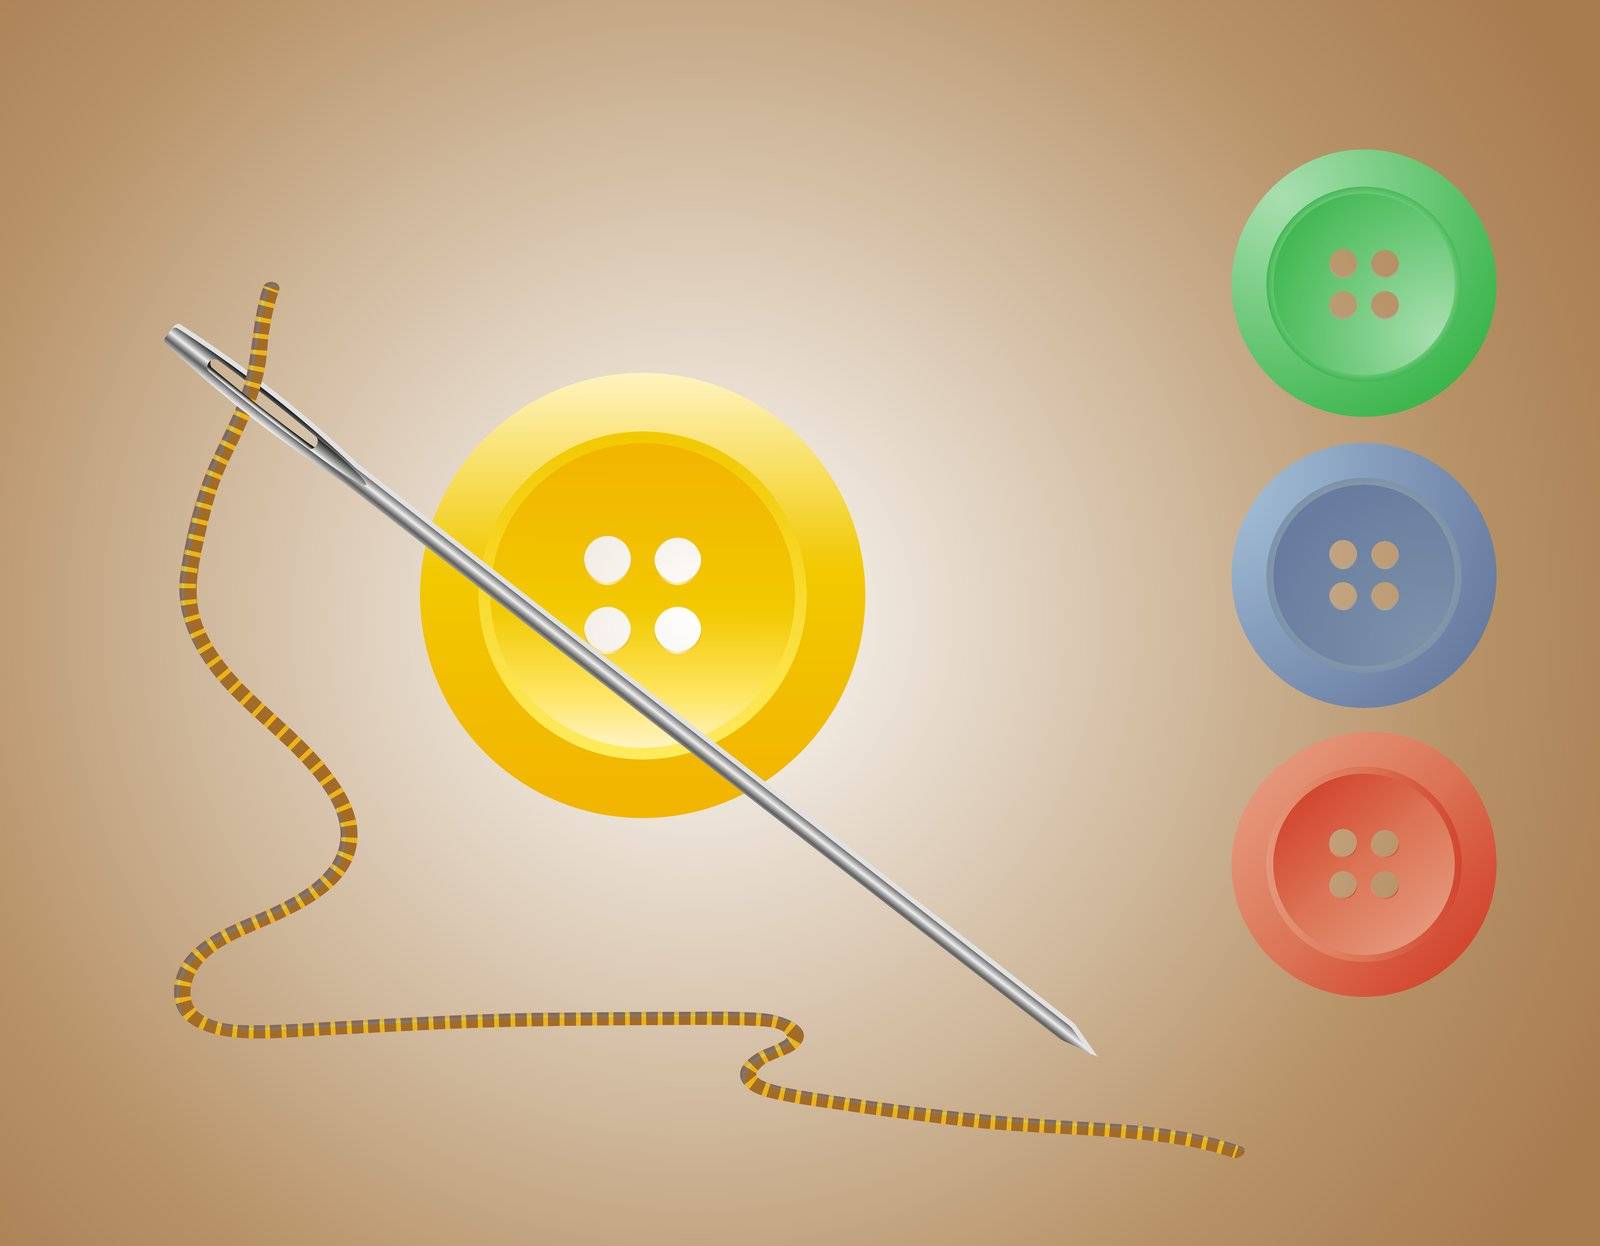 threading a needle on a background of multi-colored buttons